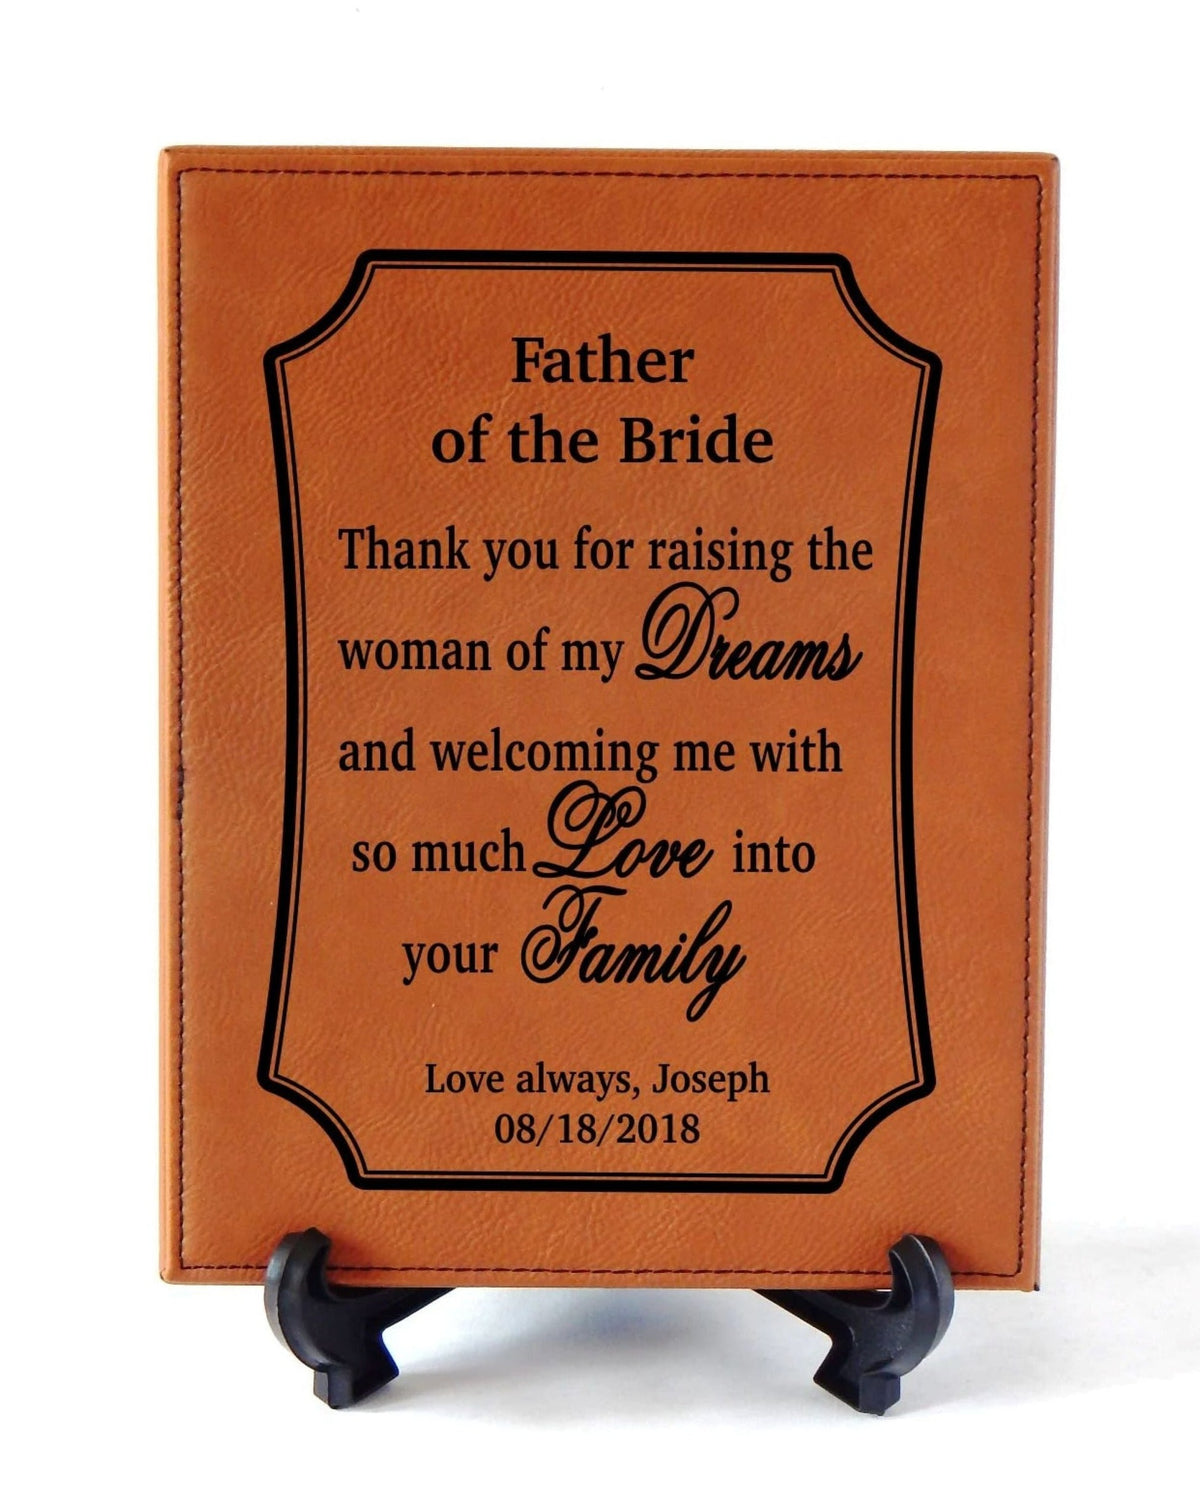 Father of the Bride Gift from Groom | Personalized Wedding Thank you Plaque for Parents